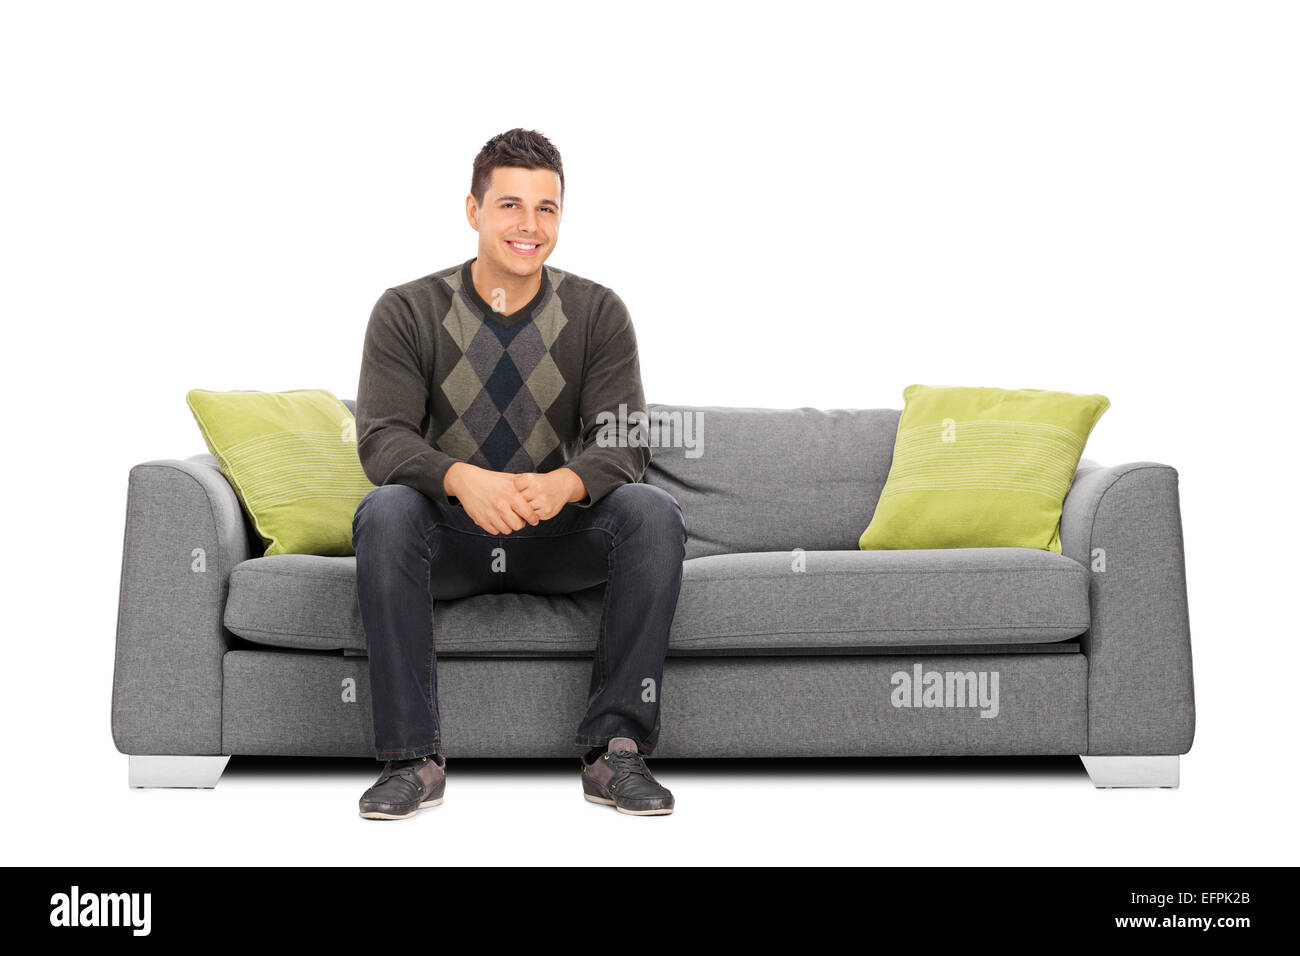 Cheerful young man sitting on a modern sofa isolated on white background Stock Photo